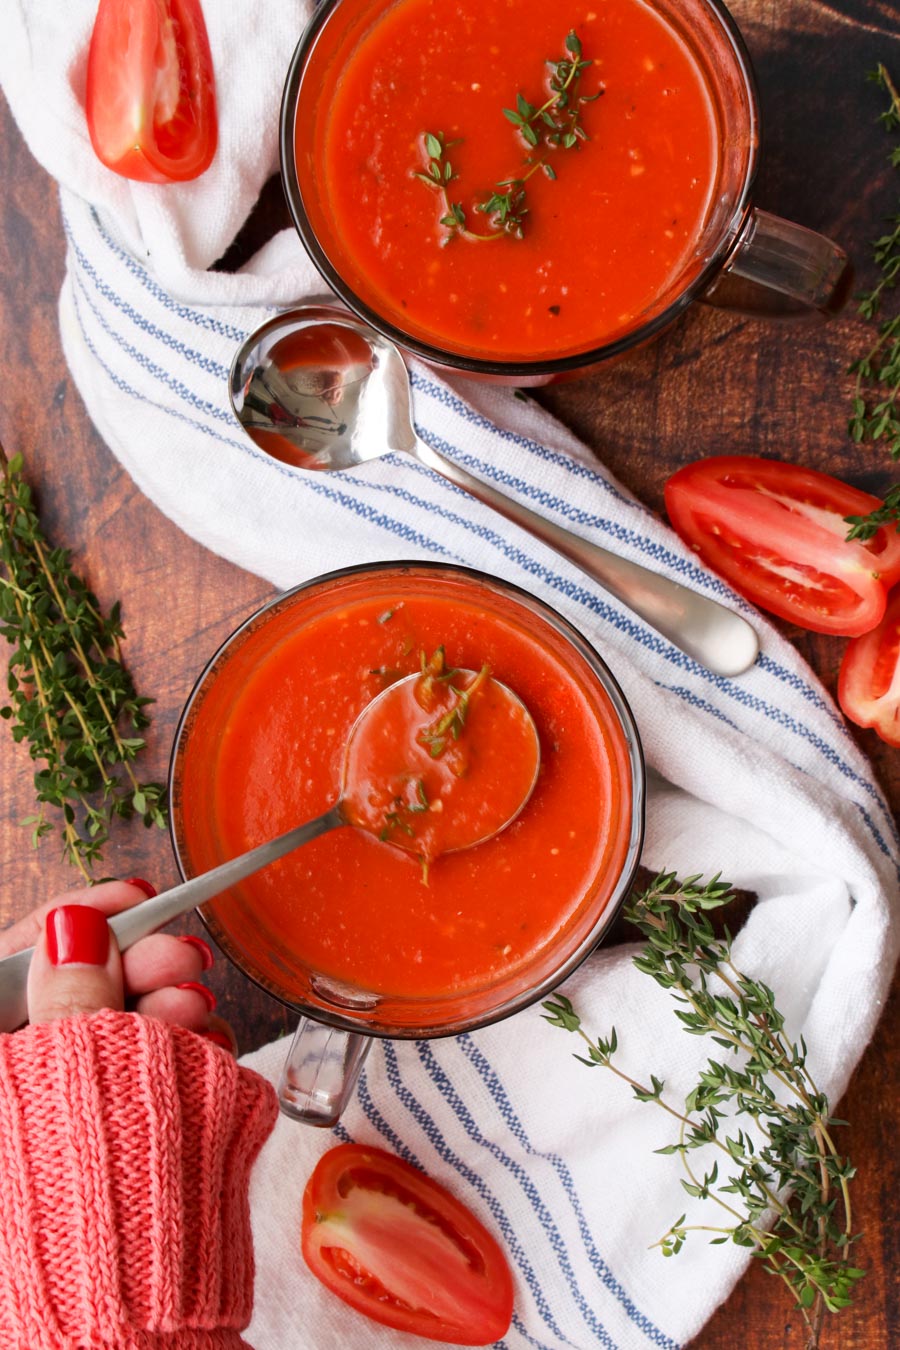 Ladies hand with a spoon of tomato soup next to another bowl of soup and a blue and white cloth